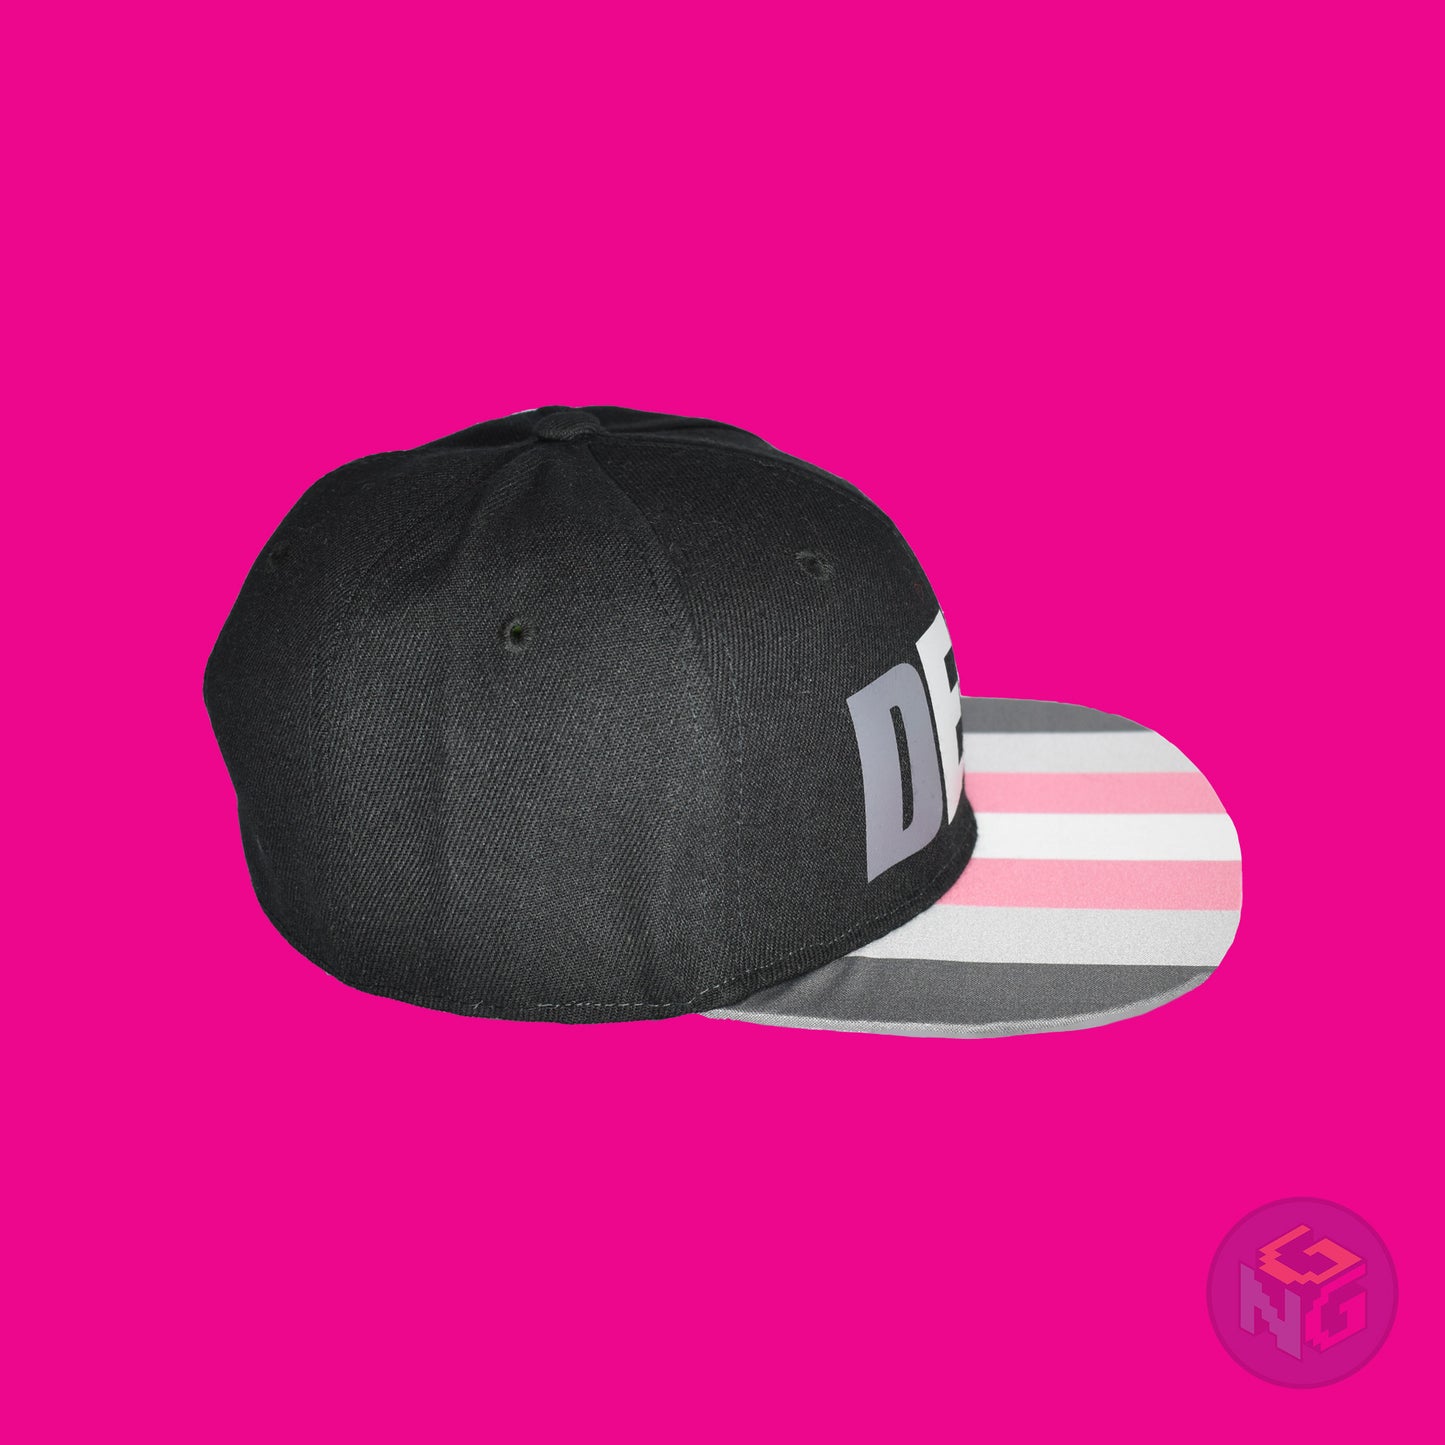 Black flat bill snapback hat. The brim has the demigirl pride flag on both sides and the front of the hat has the word “DEMI” in dark grey, light grey, pink, and white. Right view